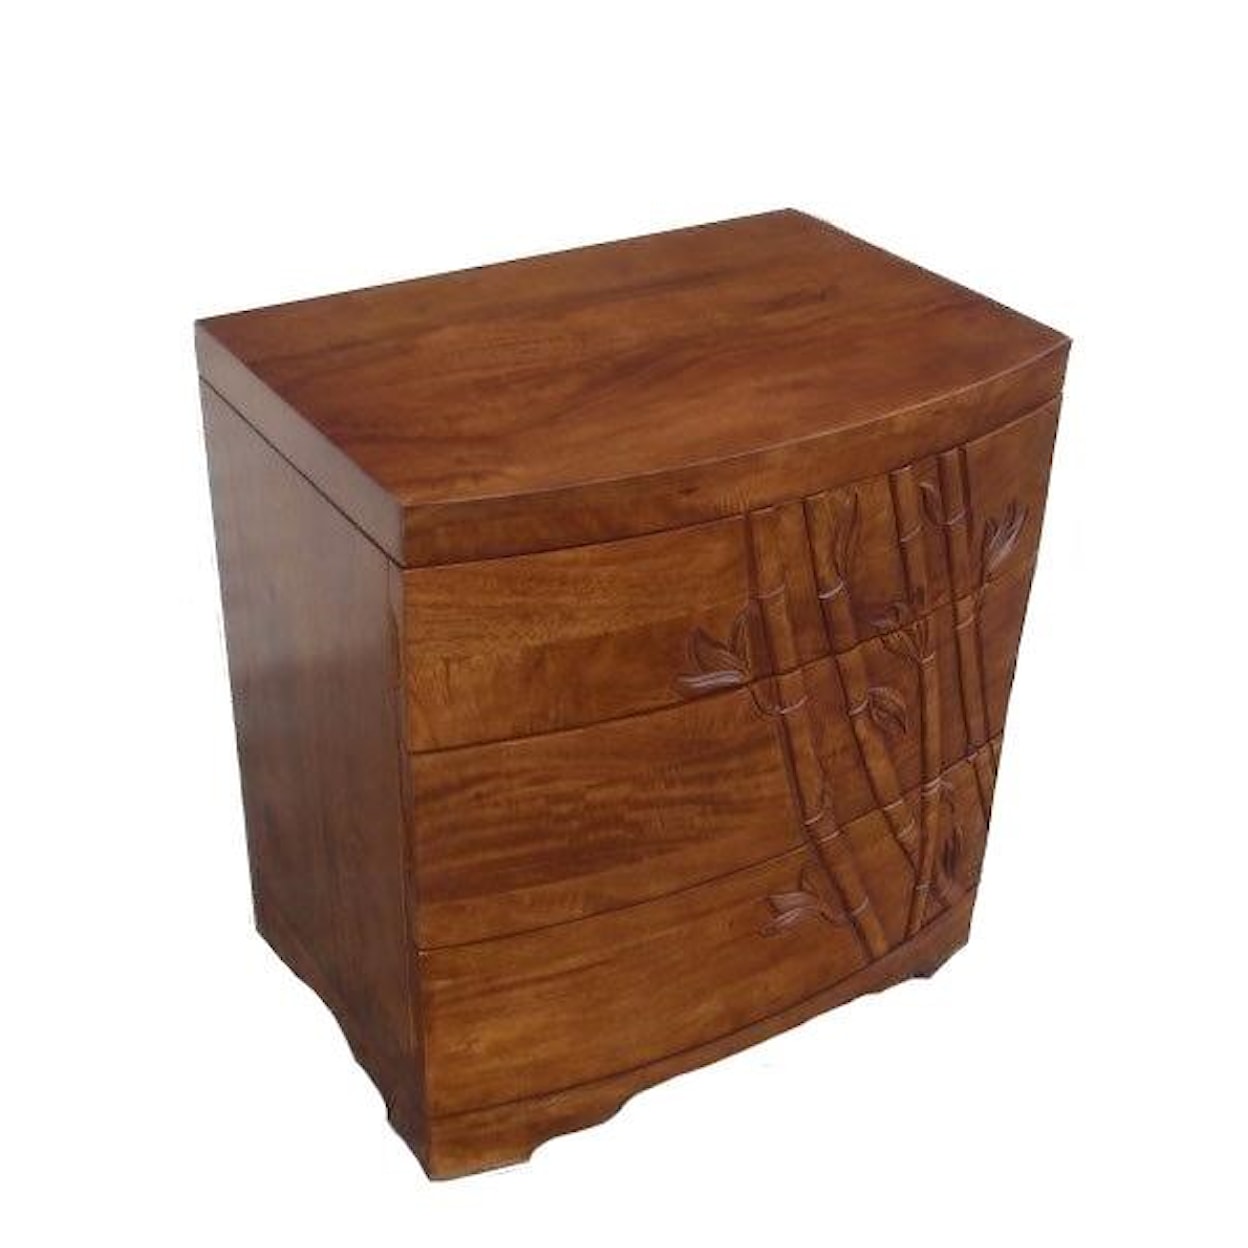 Jamieson Import Services, Inc. Foliage 18" 3 Drawer Nightstand